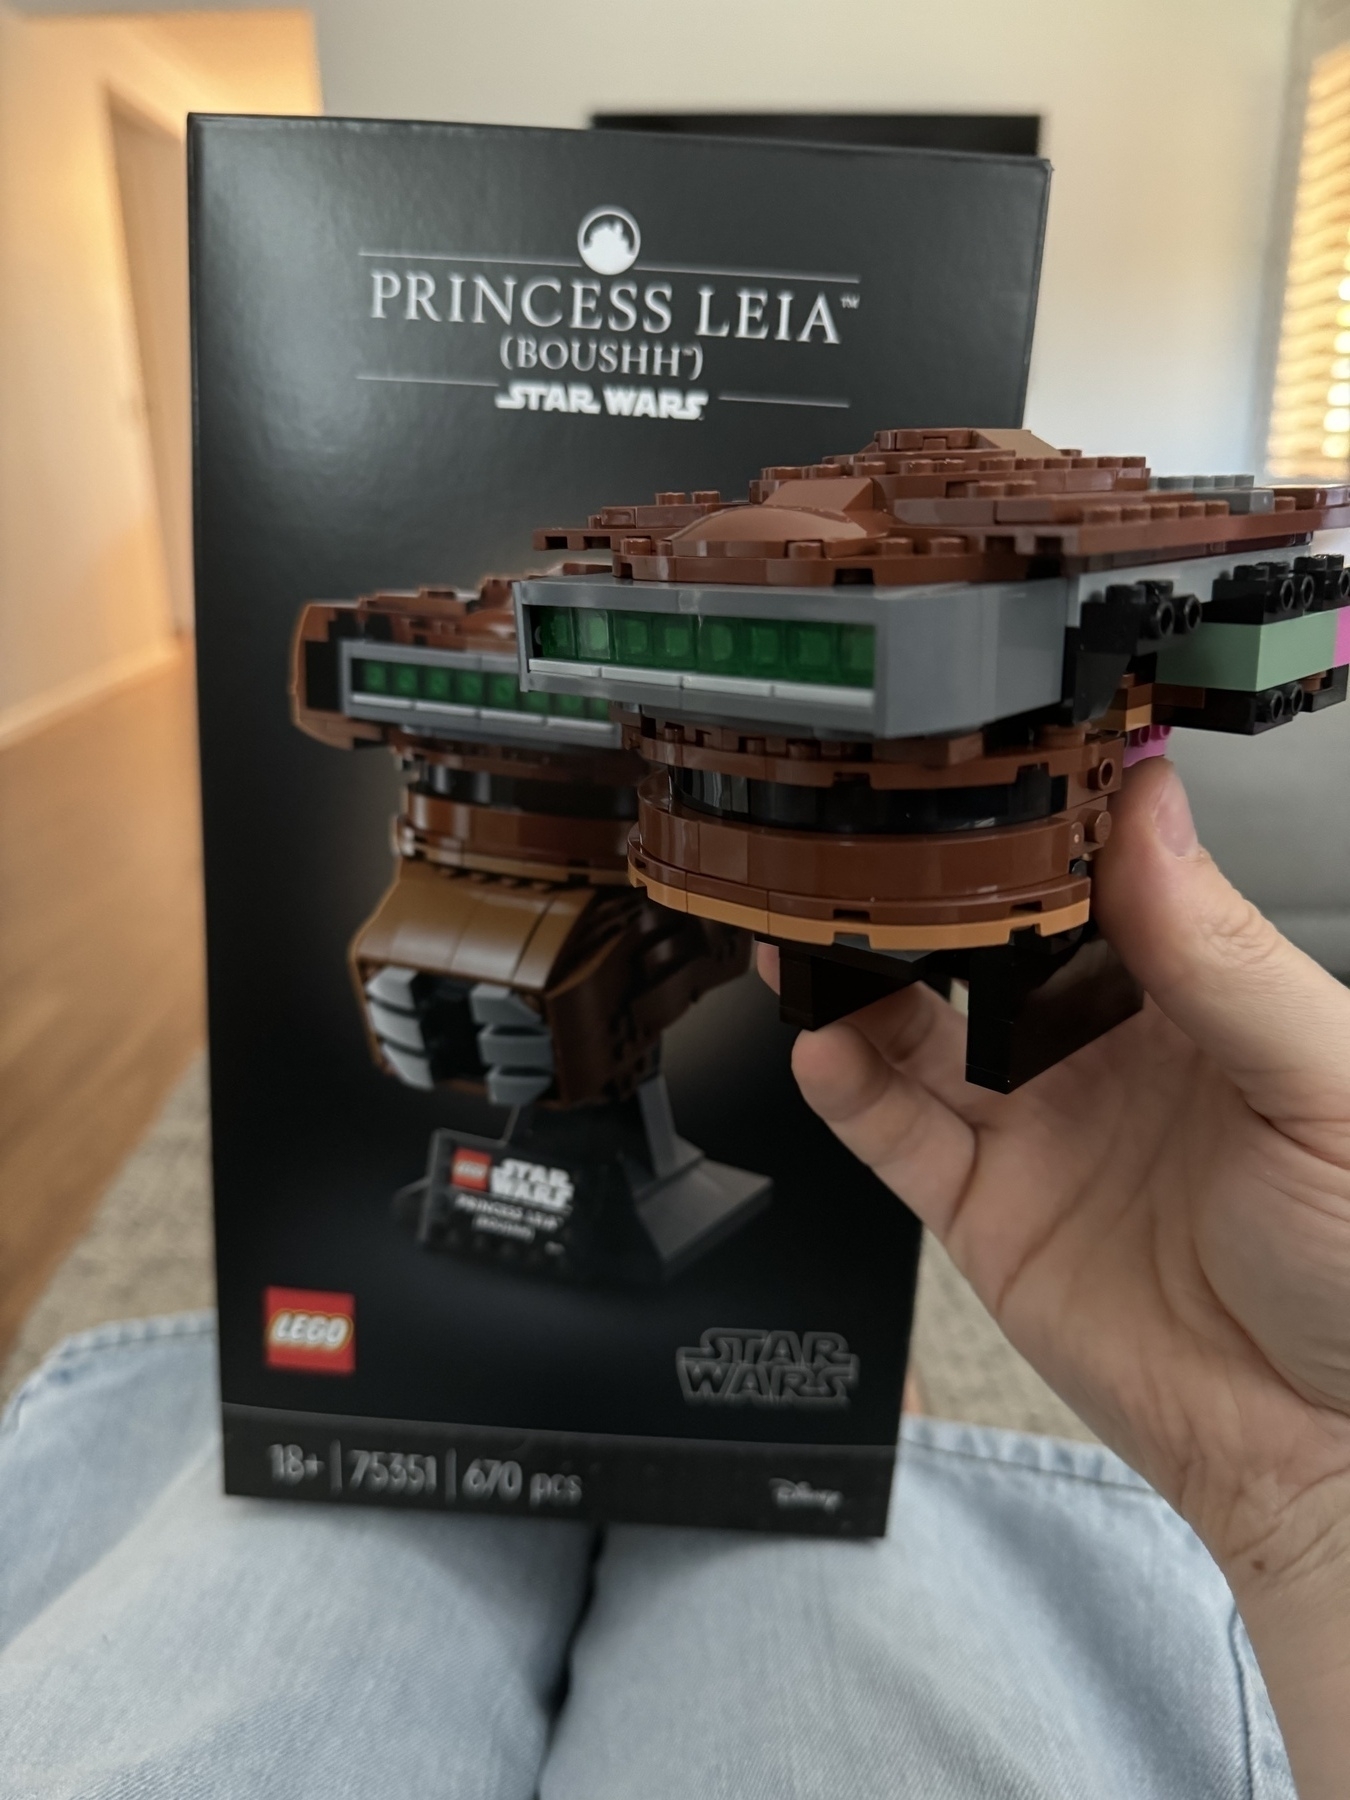 The Star Wars Lego Princess Leia Boushh helmet partially constructed, being held up in front of the box showing the completed product. 